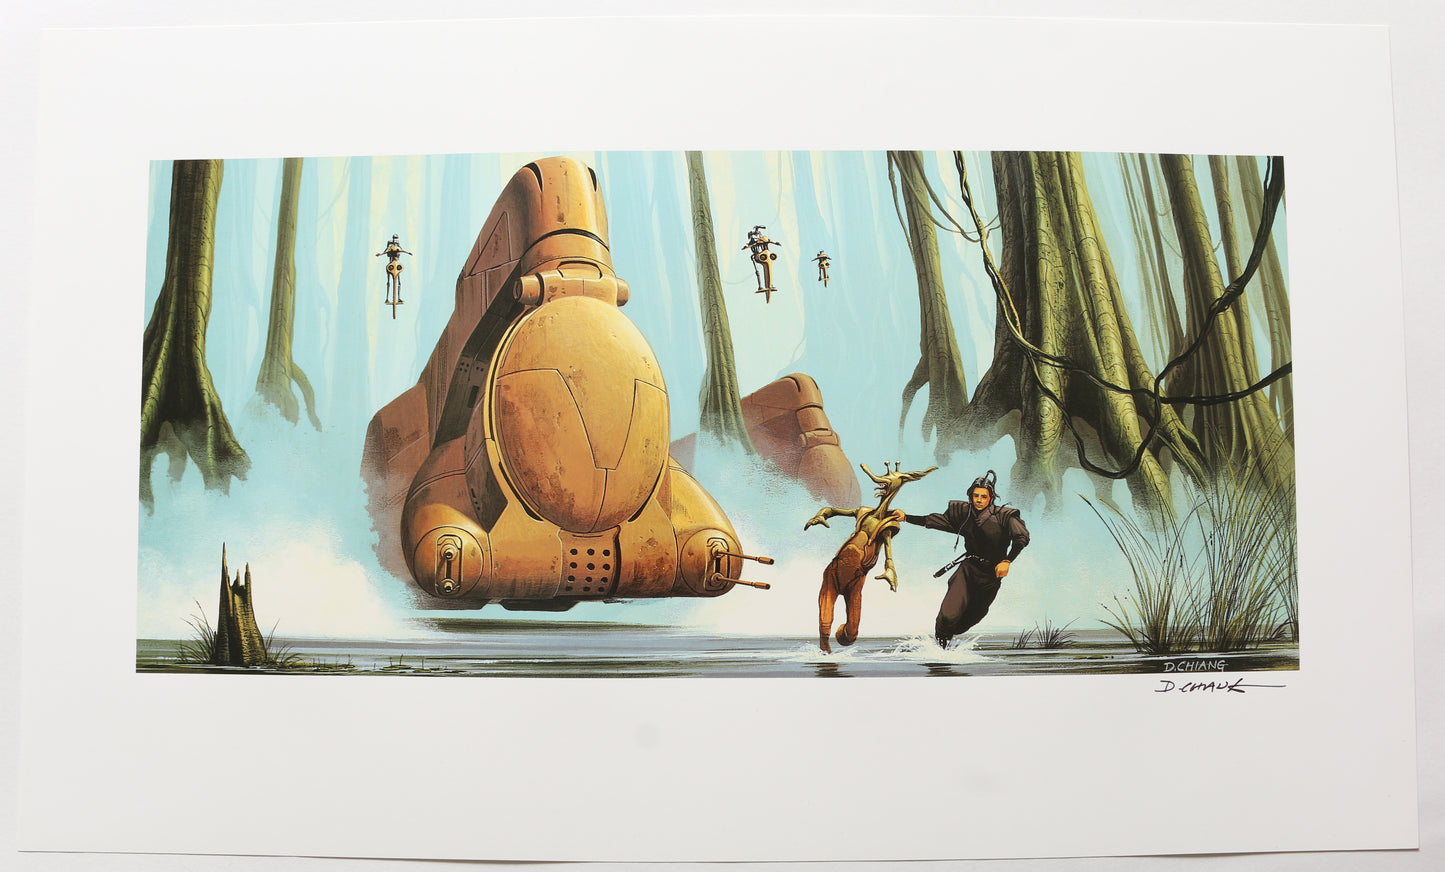 
                  
                    Star Wars Episode I: The Phantom Menace Complete Portfolio (K9) with all 20 Plates Signed by Design Director Doug Chiang
                  
                